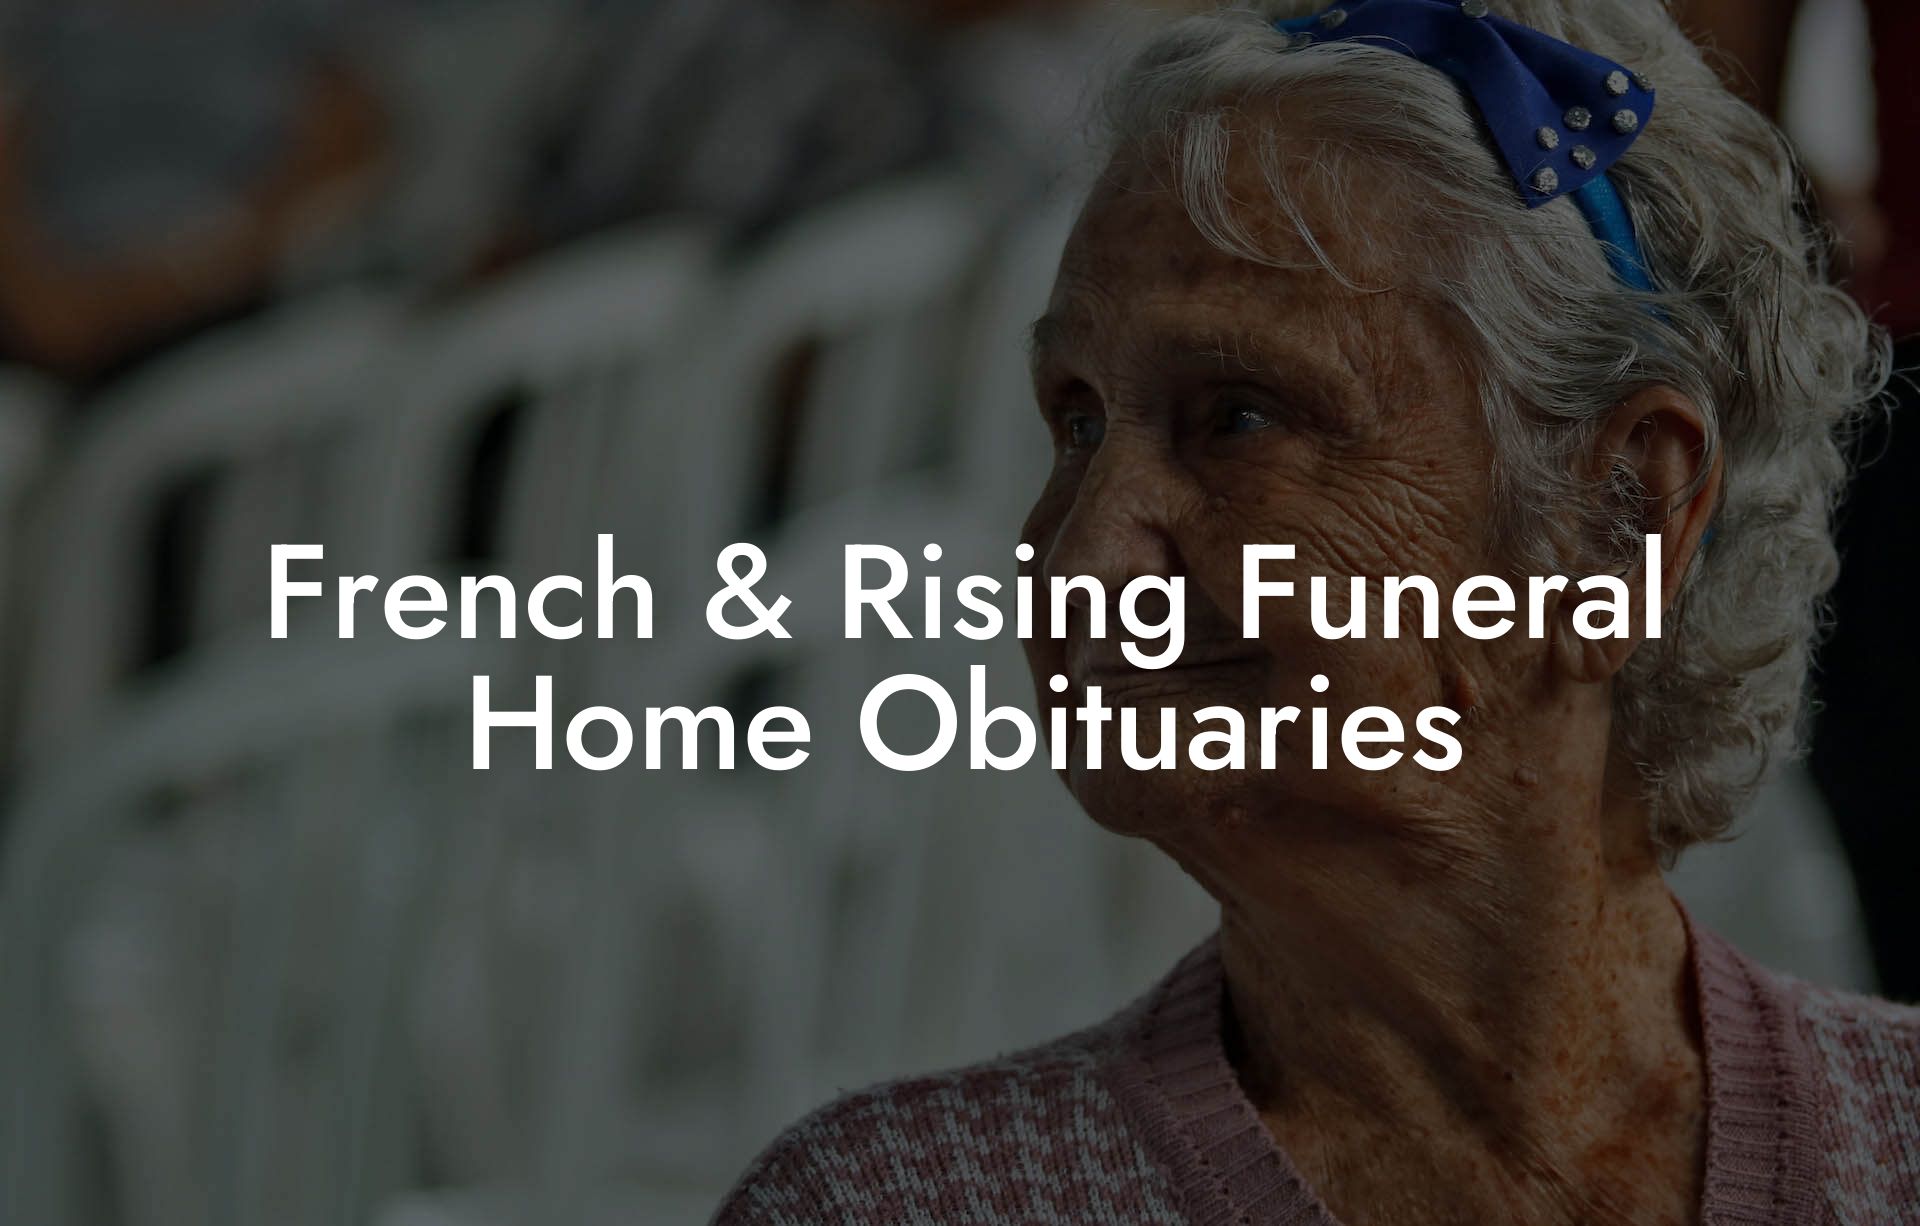 French & Rising Funeral Home Obituaries